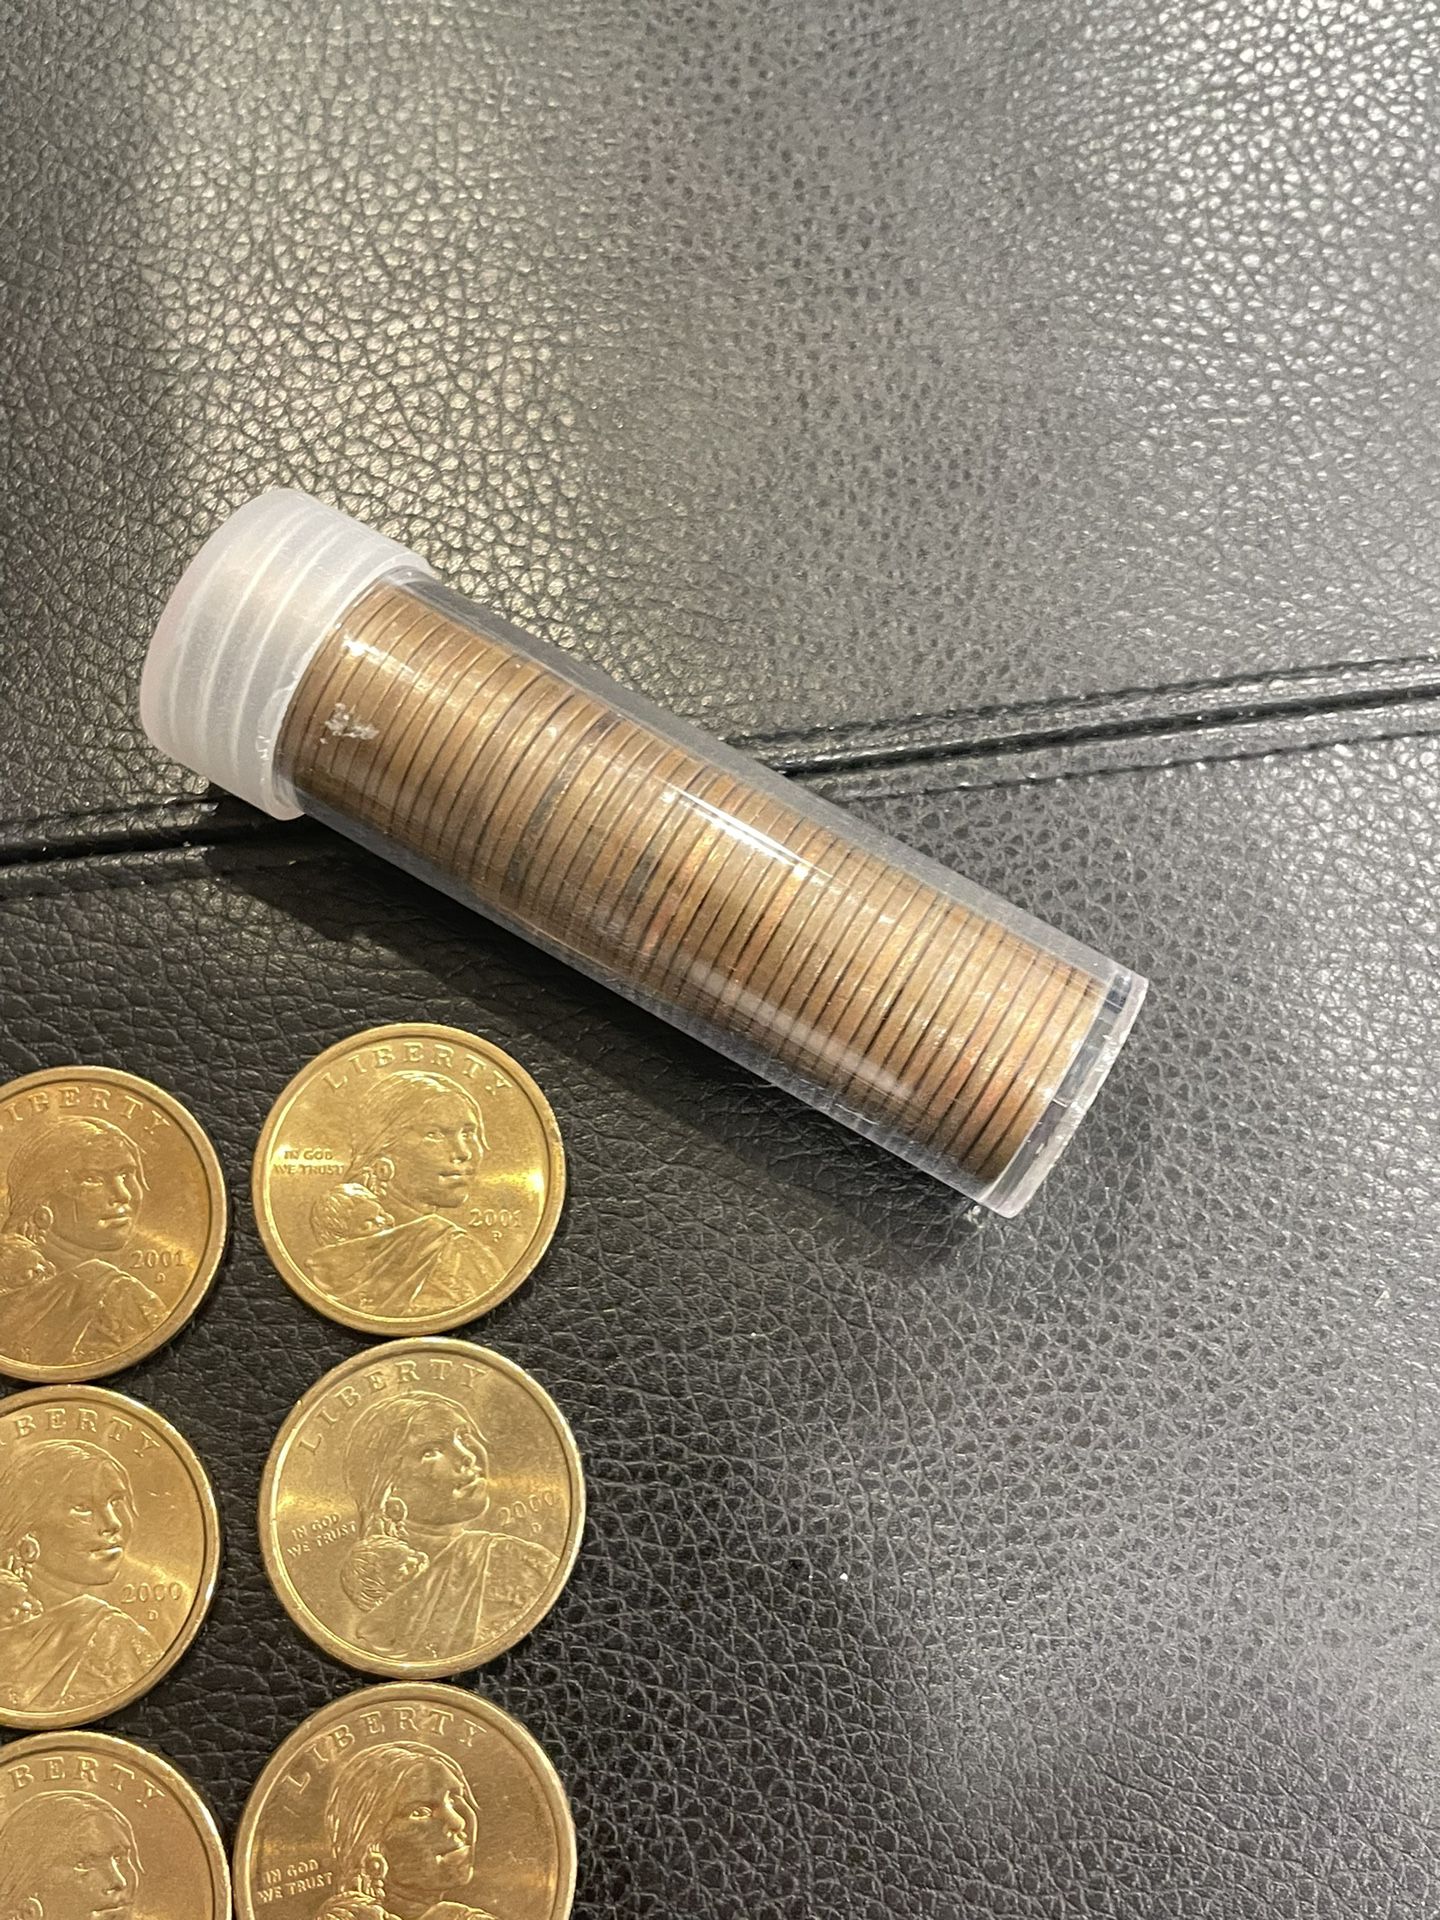 Sacajawea Dollars And 95% Copper Pennies Coins